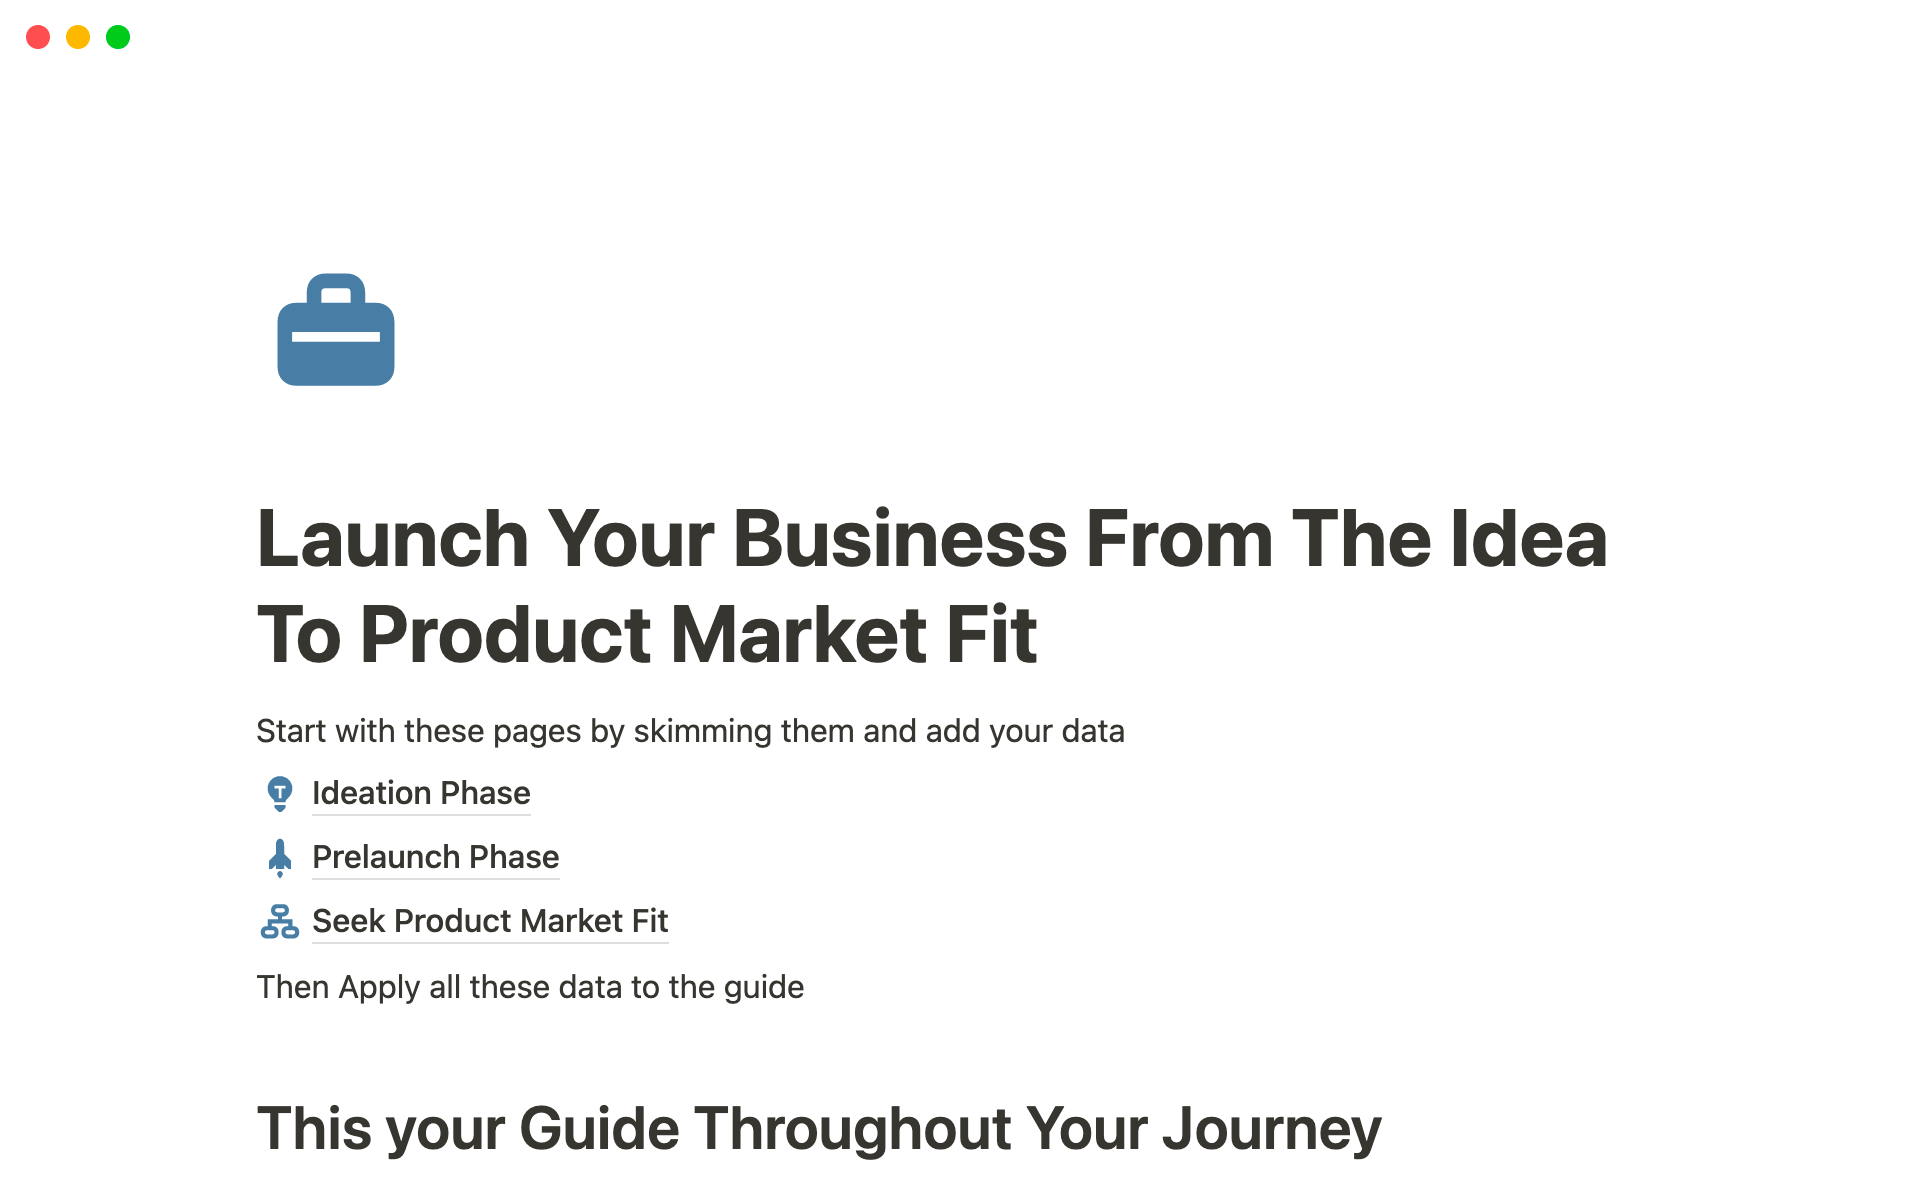 Launch Your Business From The Idea To Product Market Fit님의 템플릿 미리보기